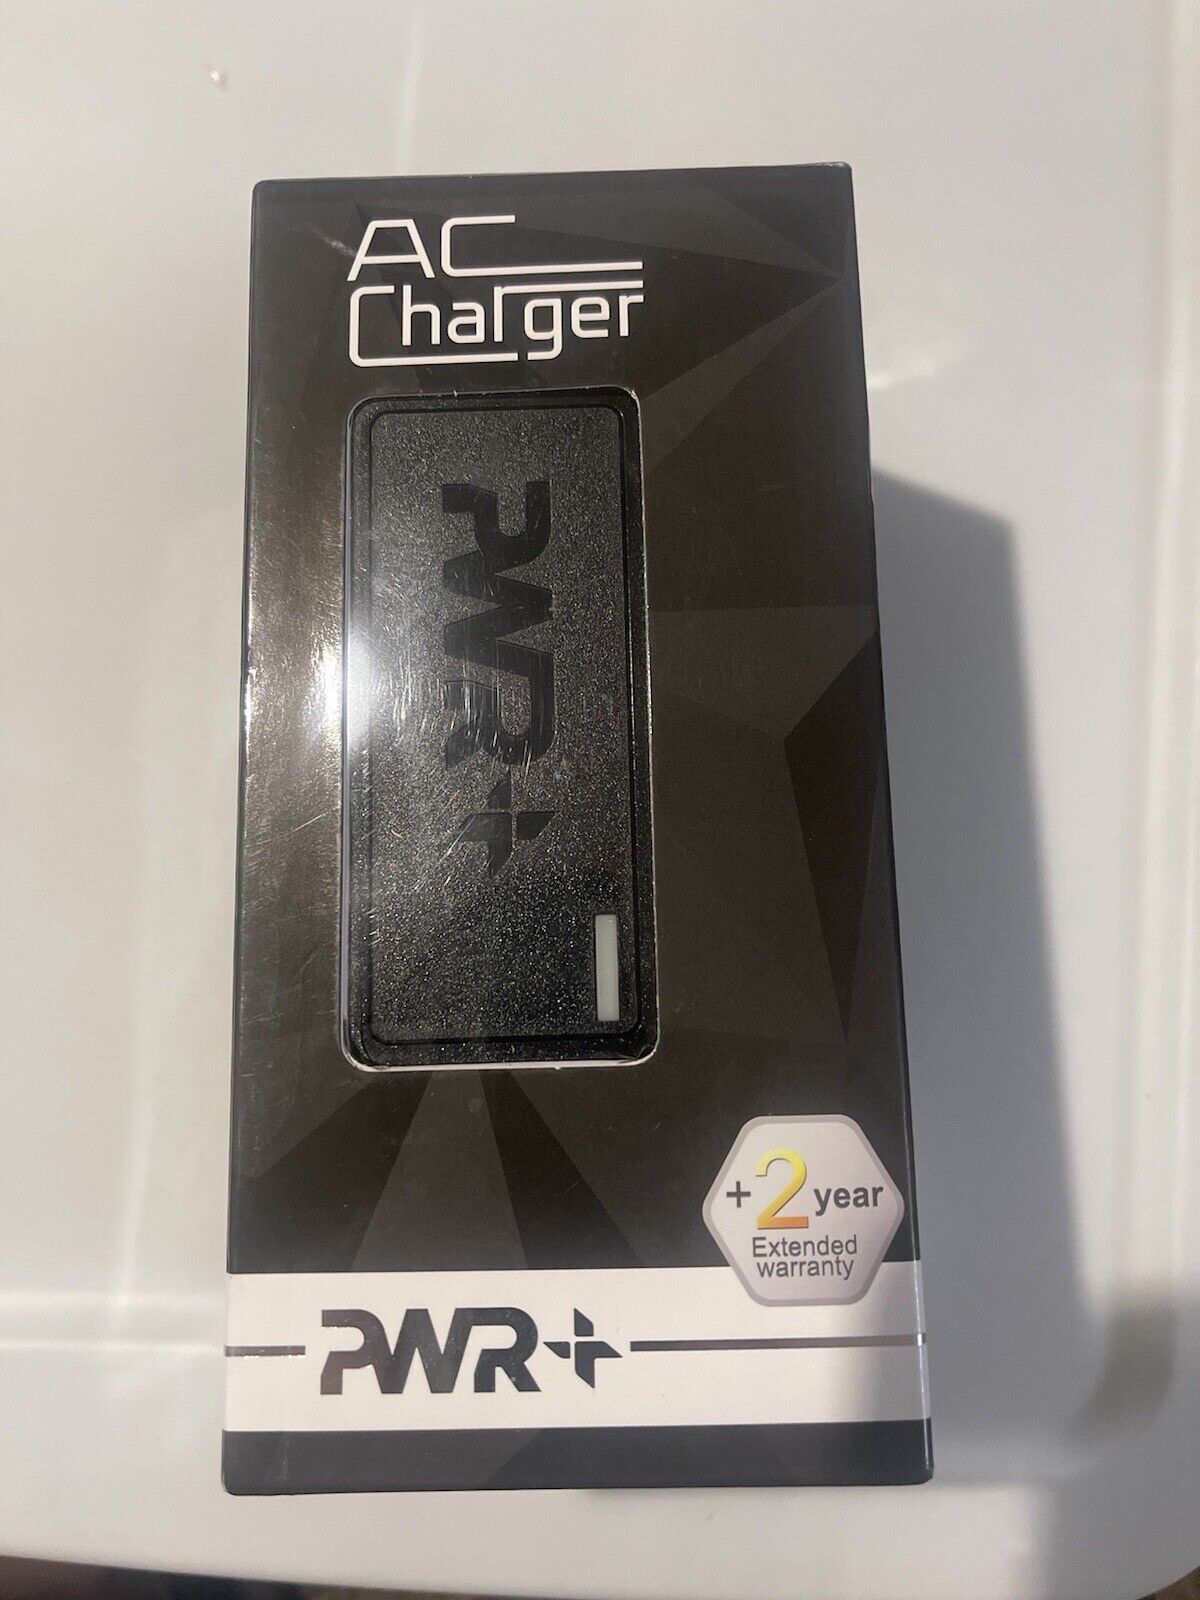 AC Charger PWR+